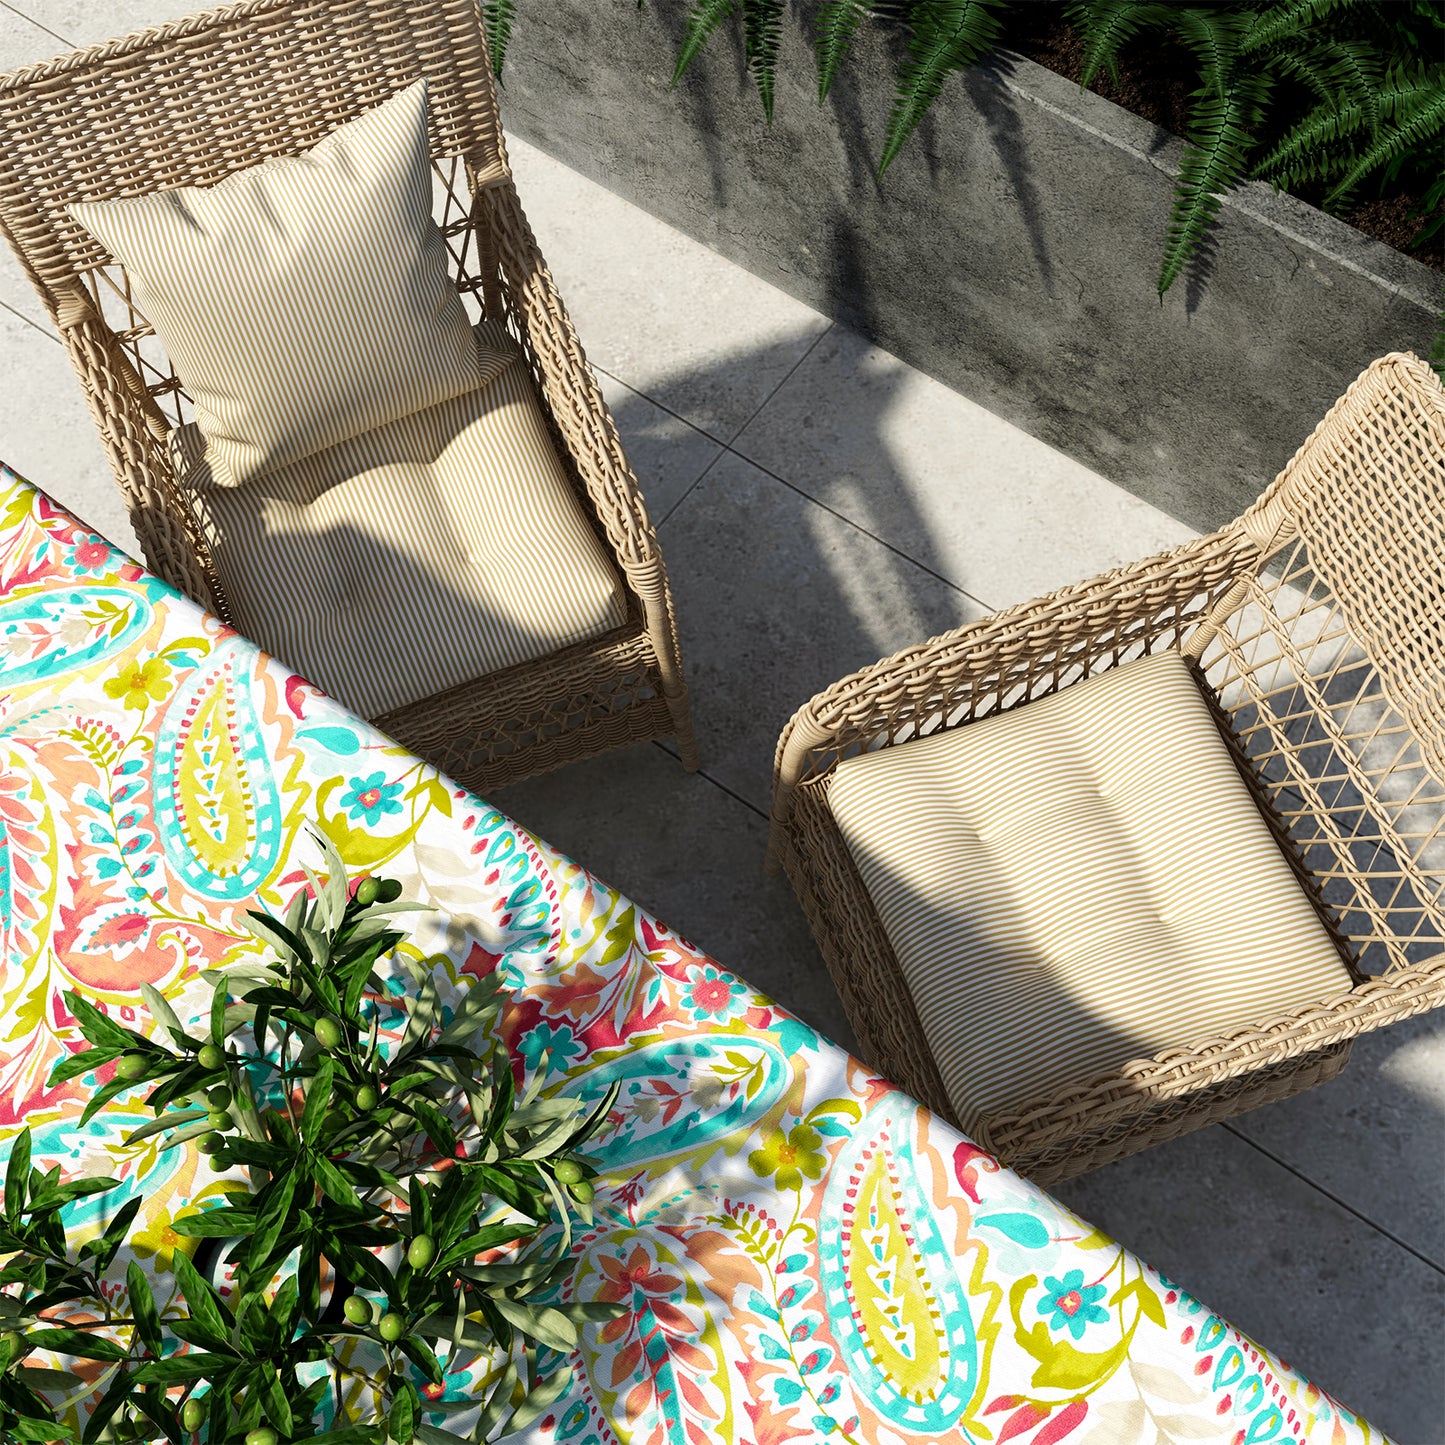 Melody Elephant Indoor/Outdoor Square Tufted Seat Cushions with Ties, Fade Resistant Patio Wicker Thick Chair Pads Pack of 2, 19 x 19 x 5 Inch, Stripe Beige